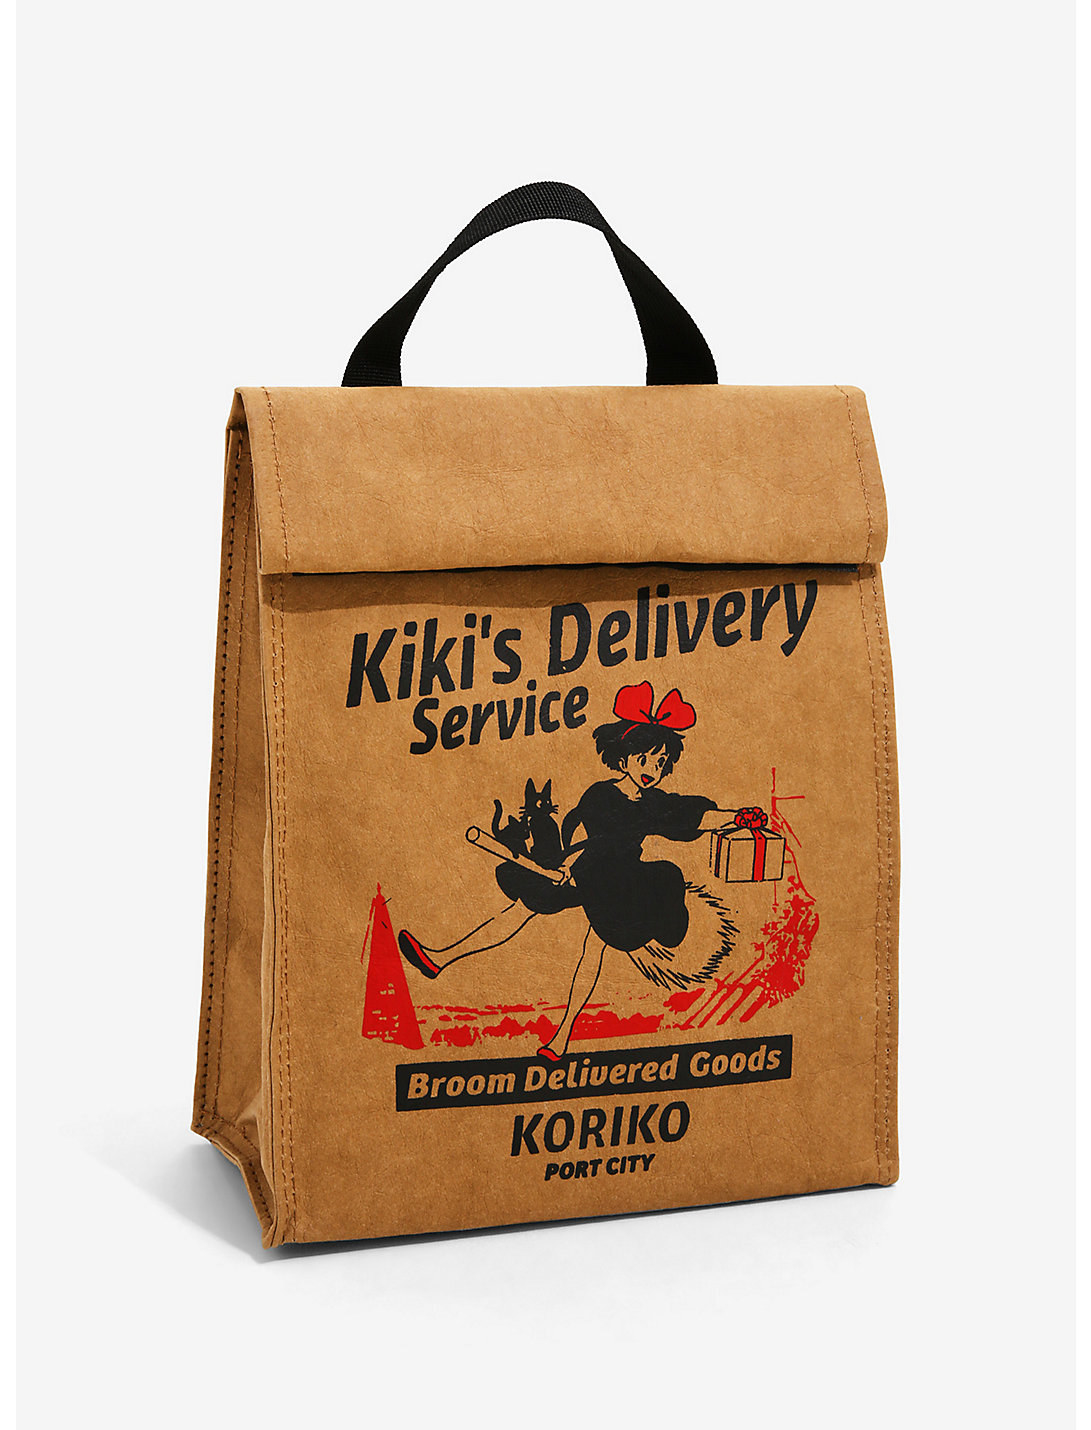 the brown bag with black handle and black and red image of KiKi and cats on a broom